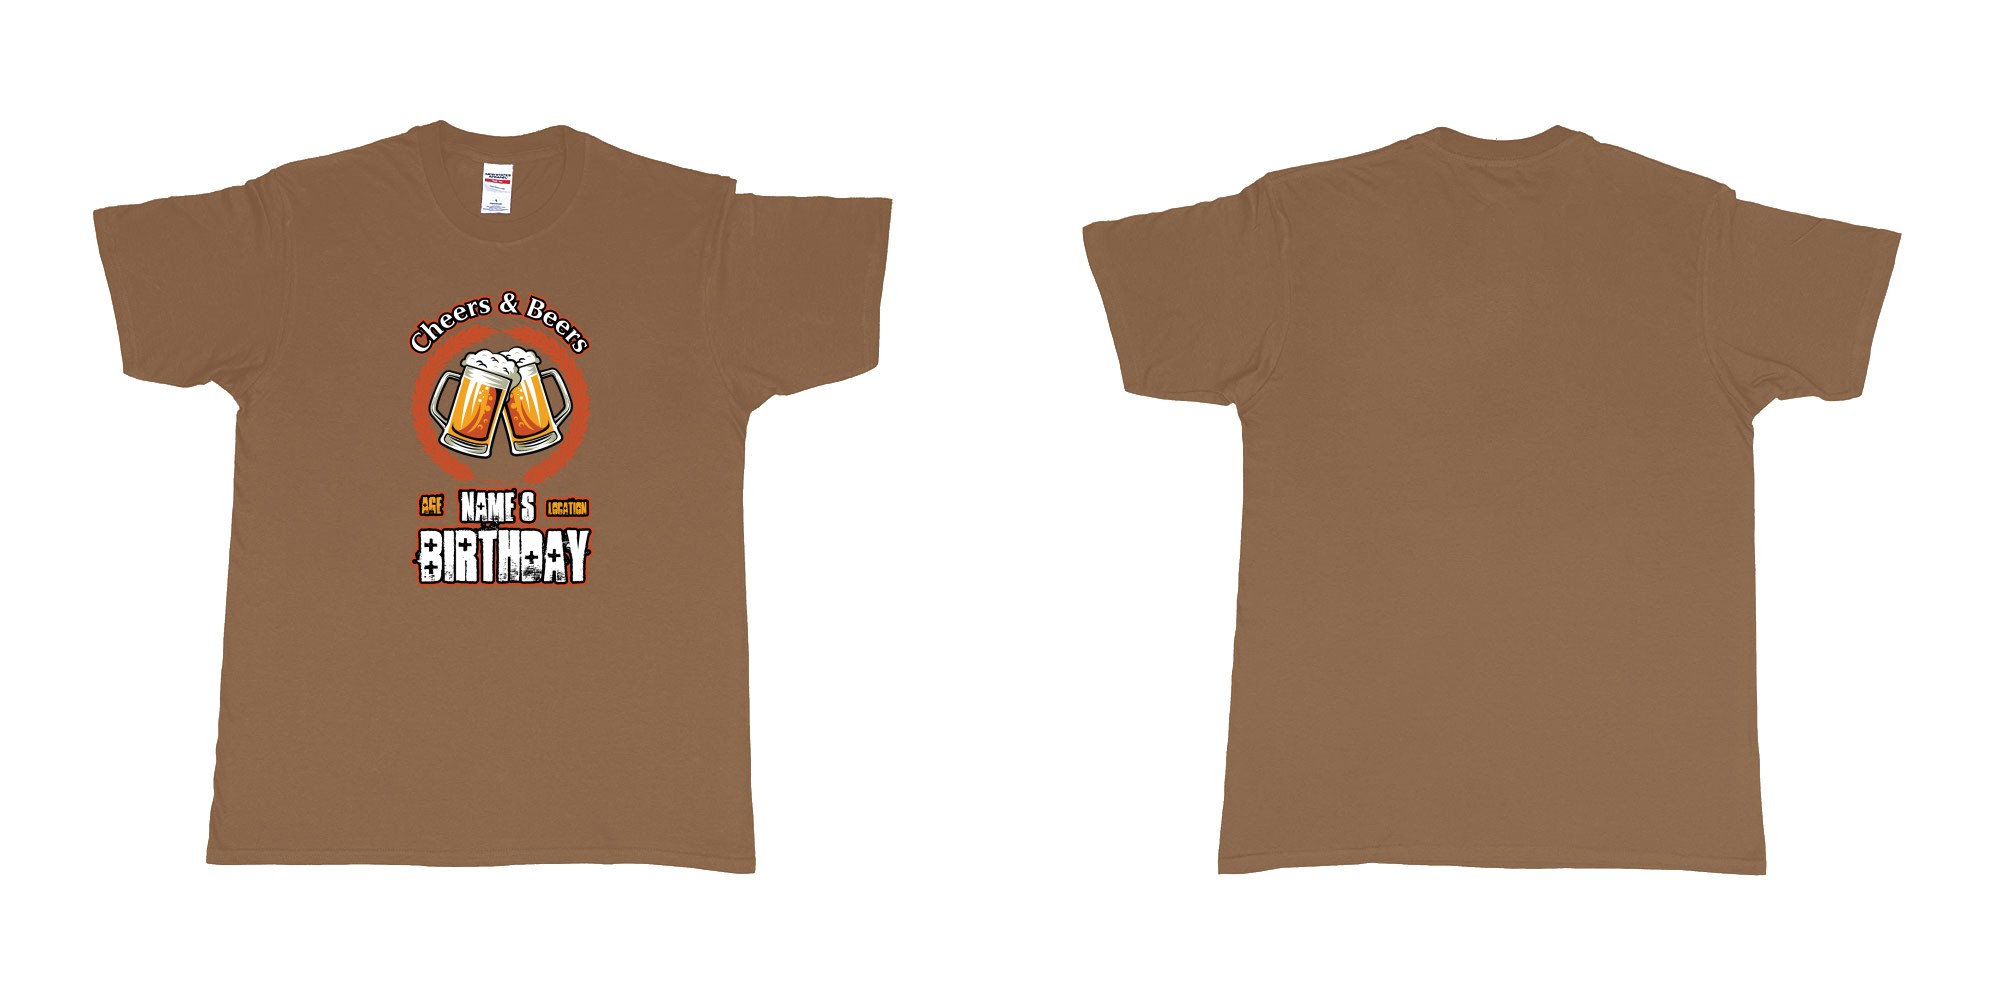 Custom tshirt design cheers and beers birthday in fabric color chestnut choice your own text made in Bali by The Pirate Way